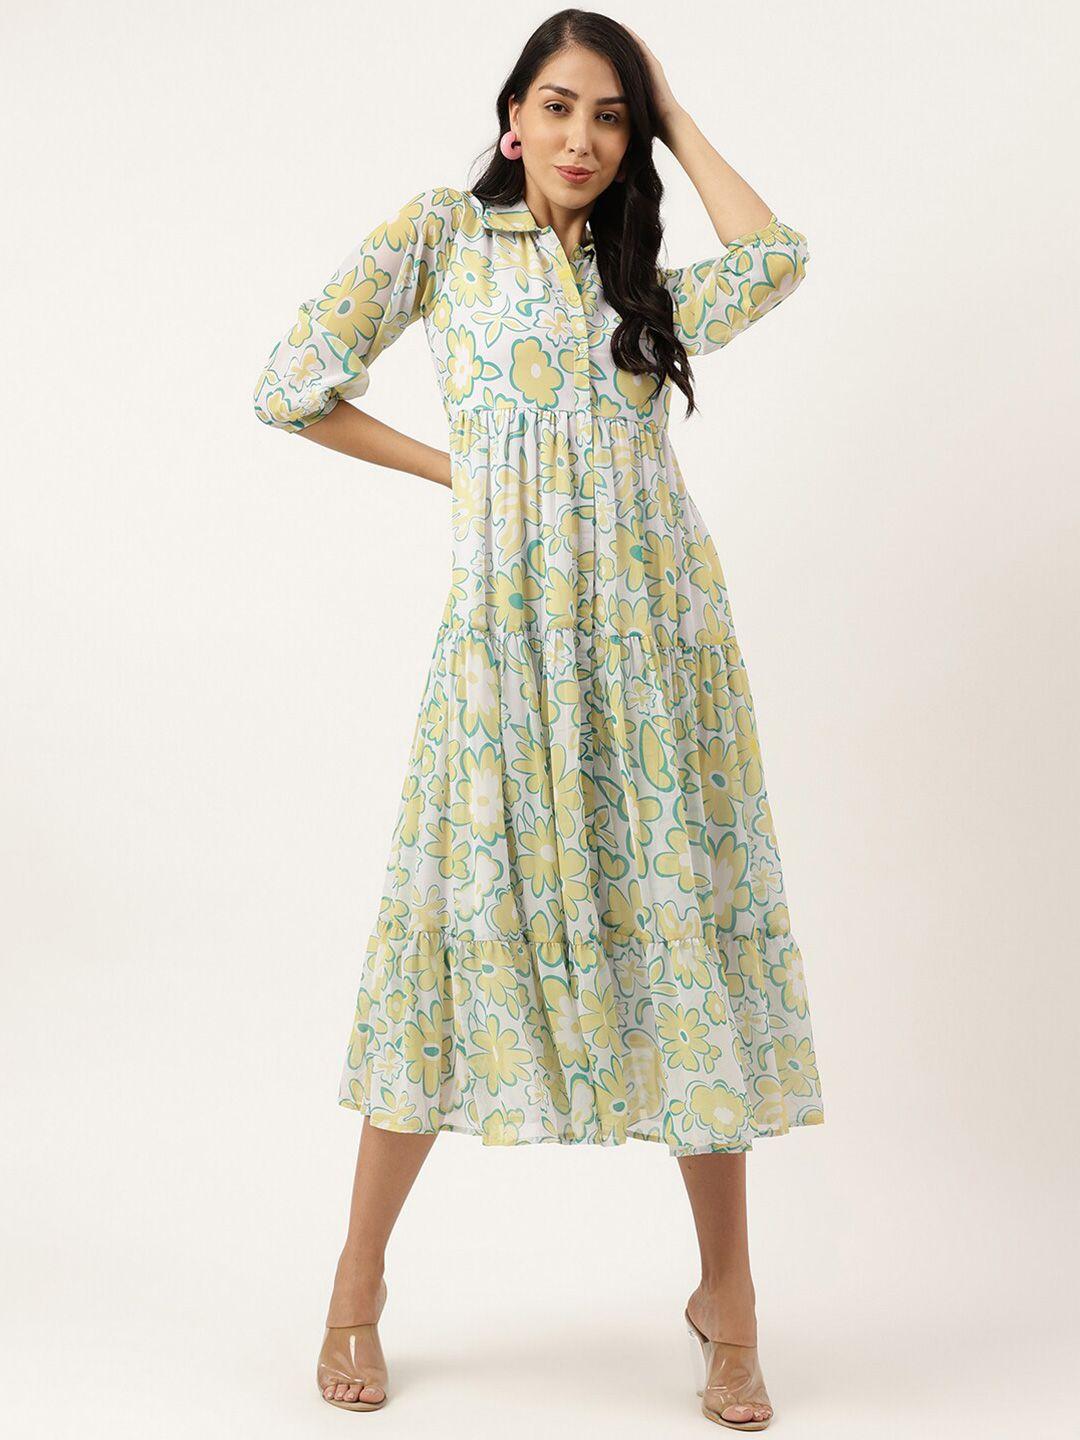 masakali.co floral printed tiered georgette a-line midi dress